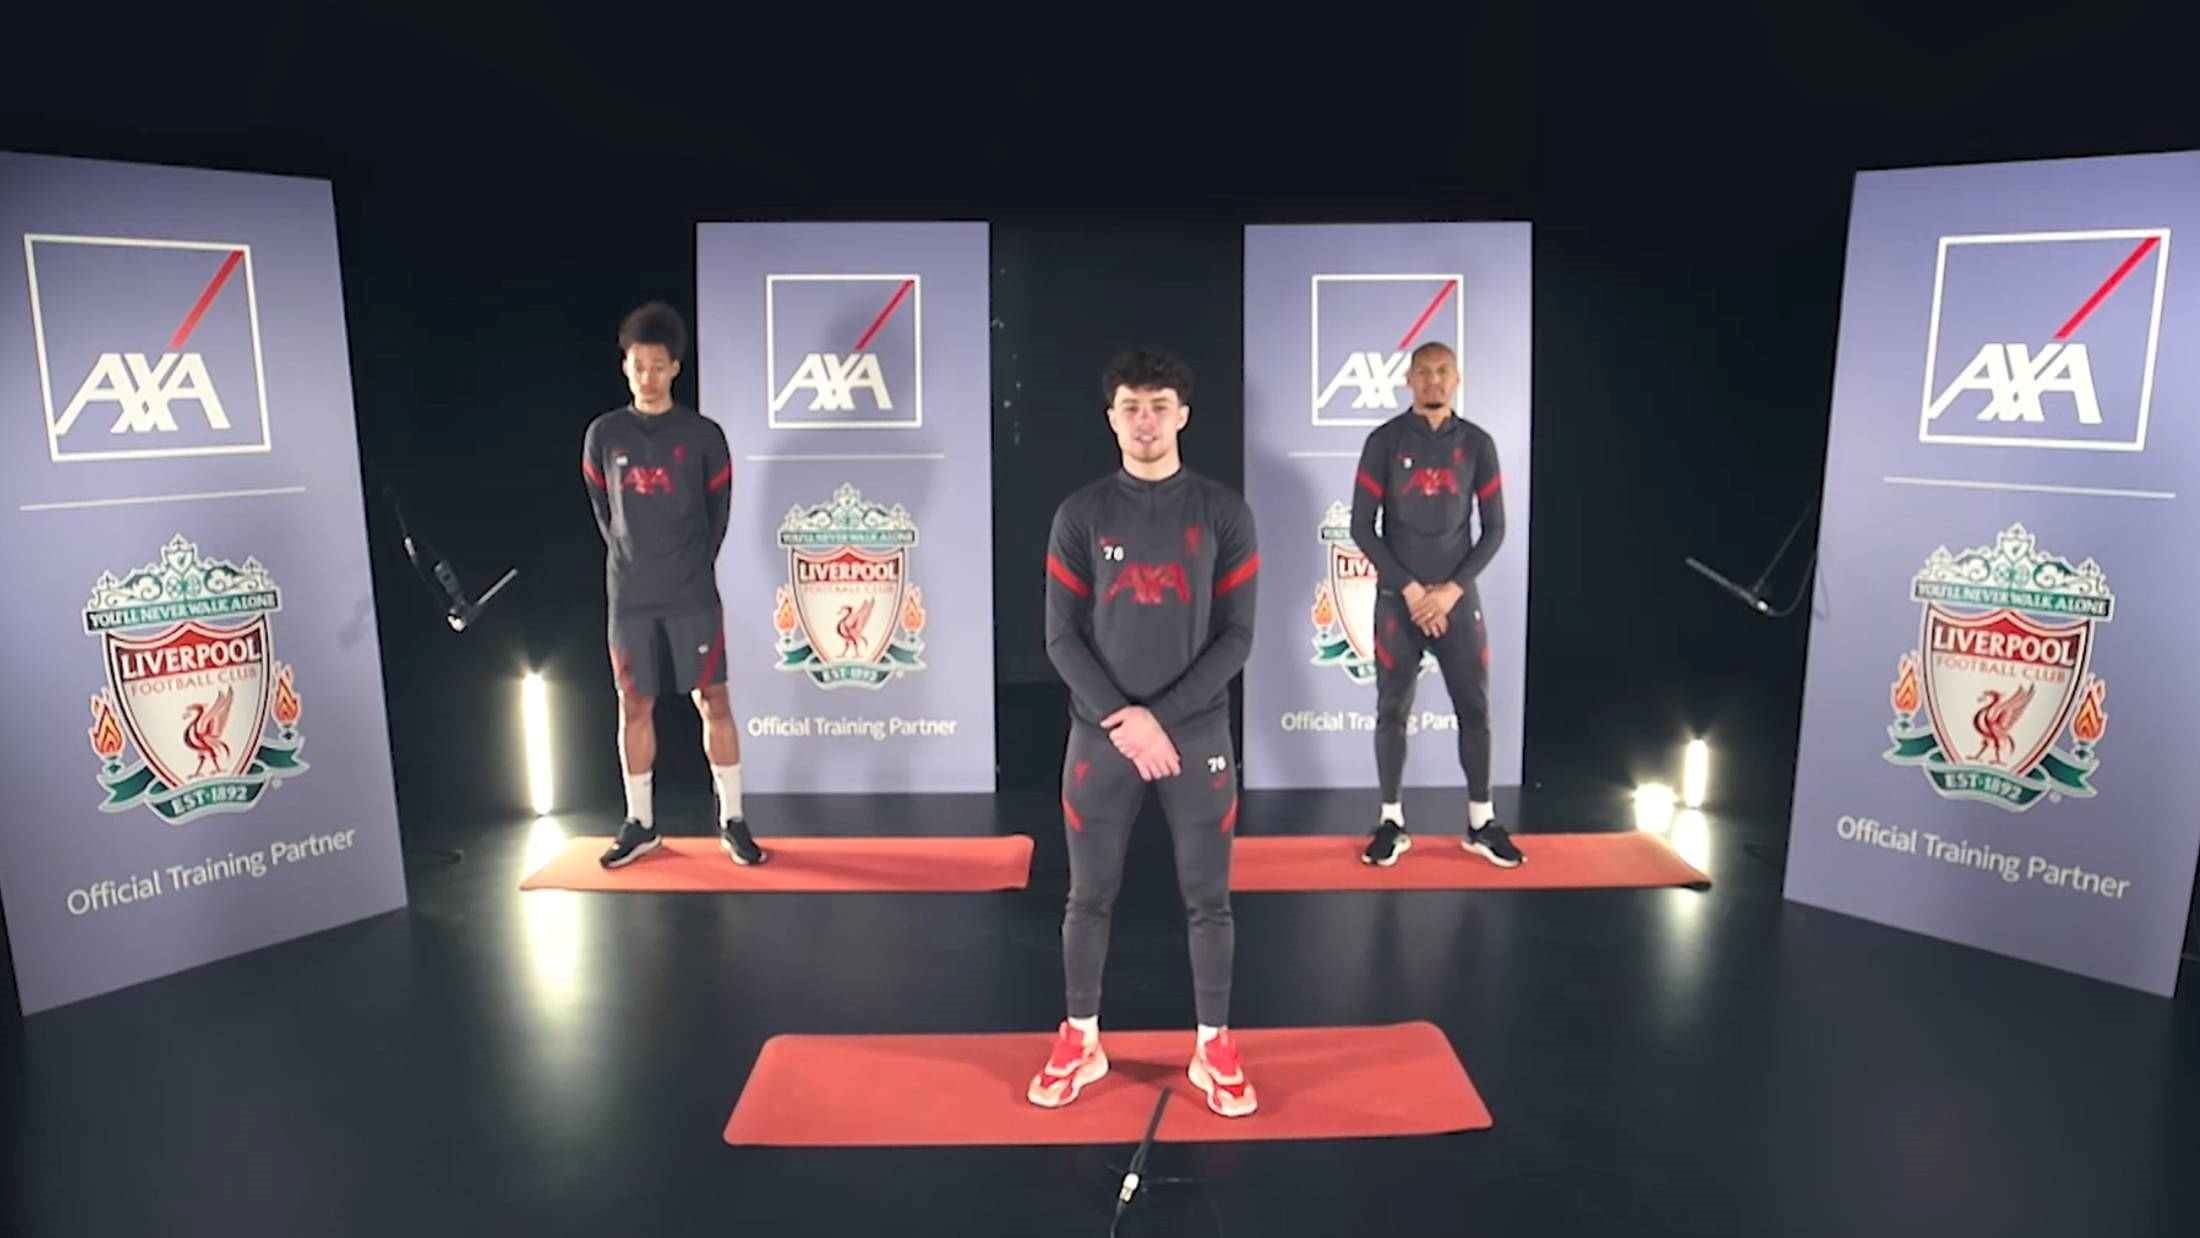 Players from Liverpool Football Club lead the LFC Challenge from studio with yoga mats on floor